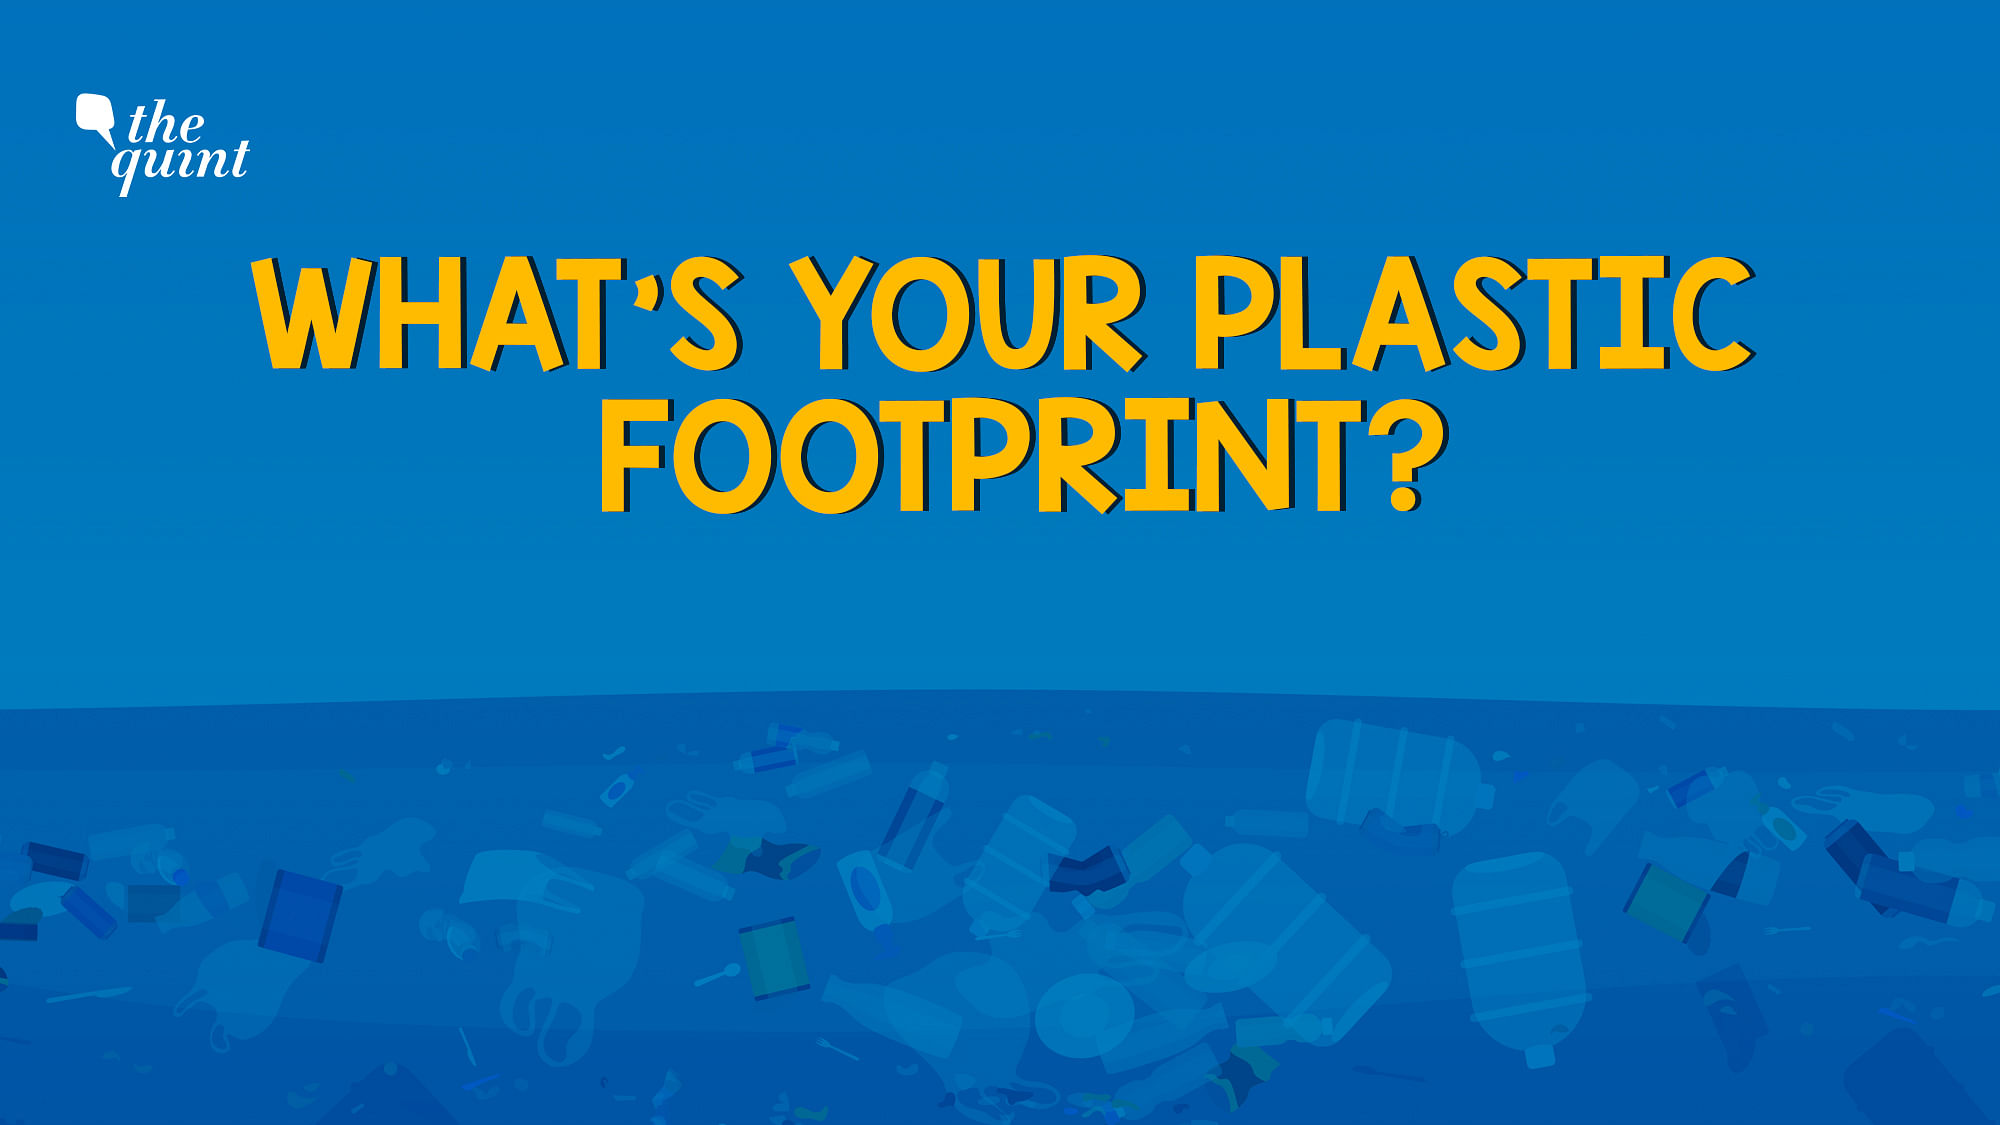 How much single-use plastic waste do you add to the environment? Take this test to find out.